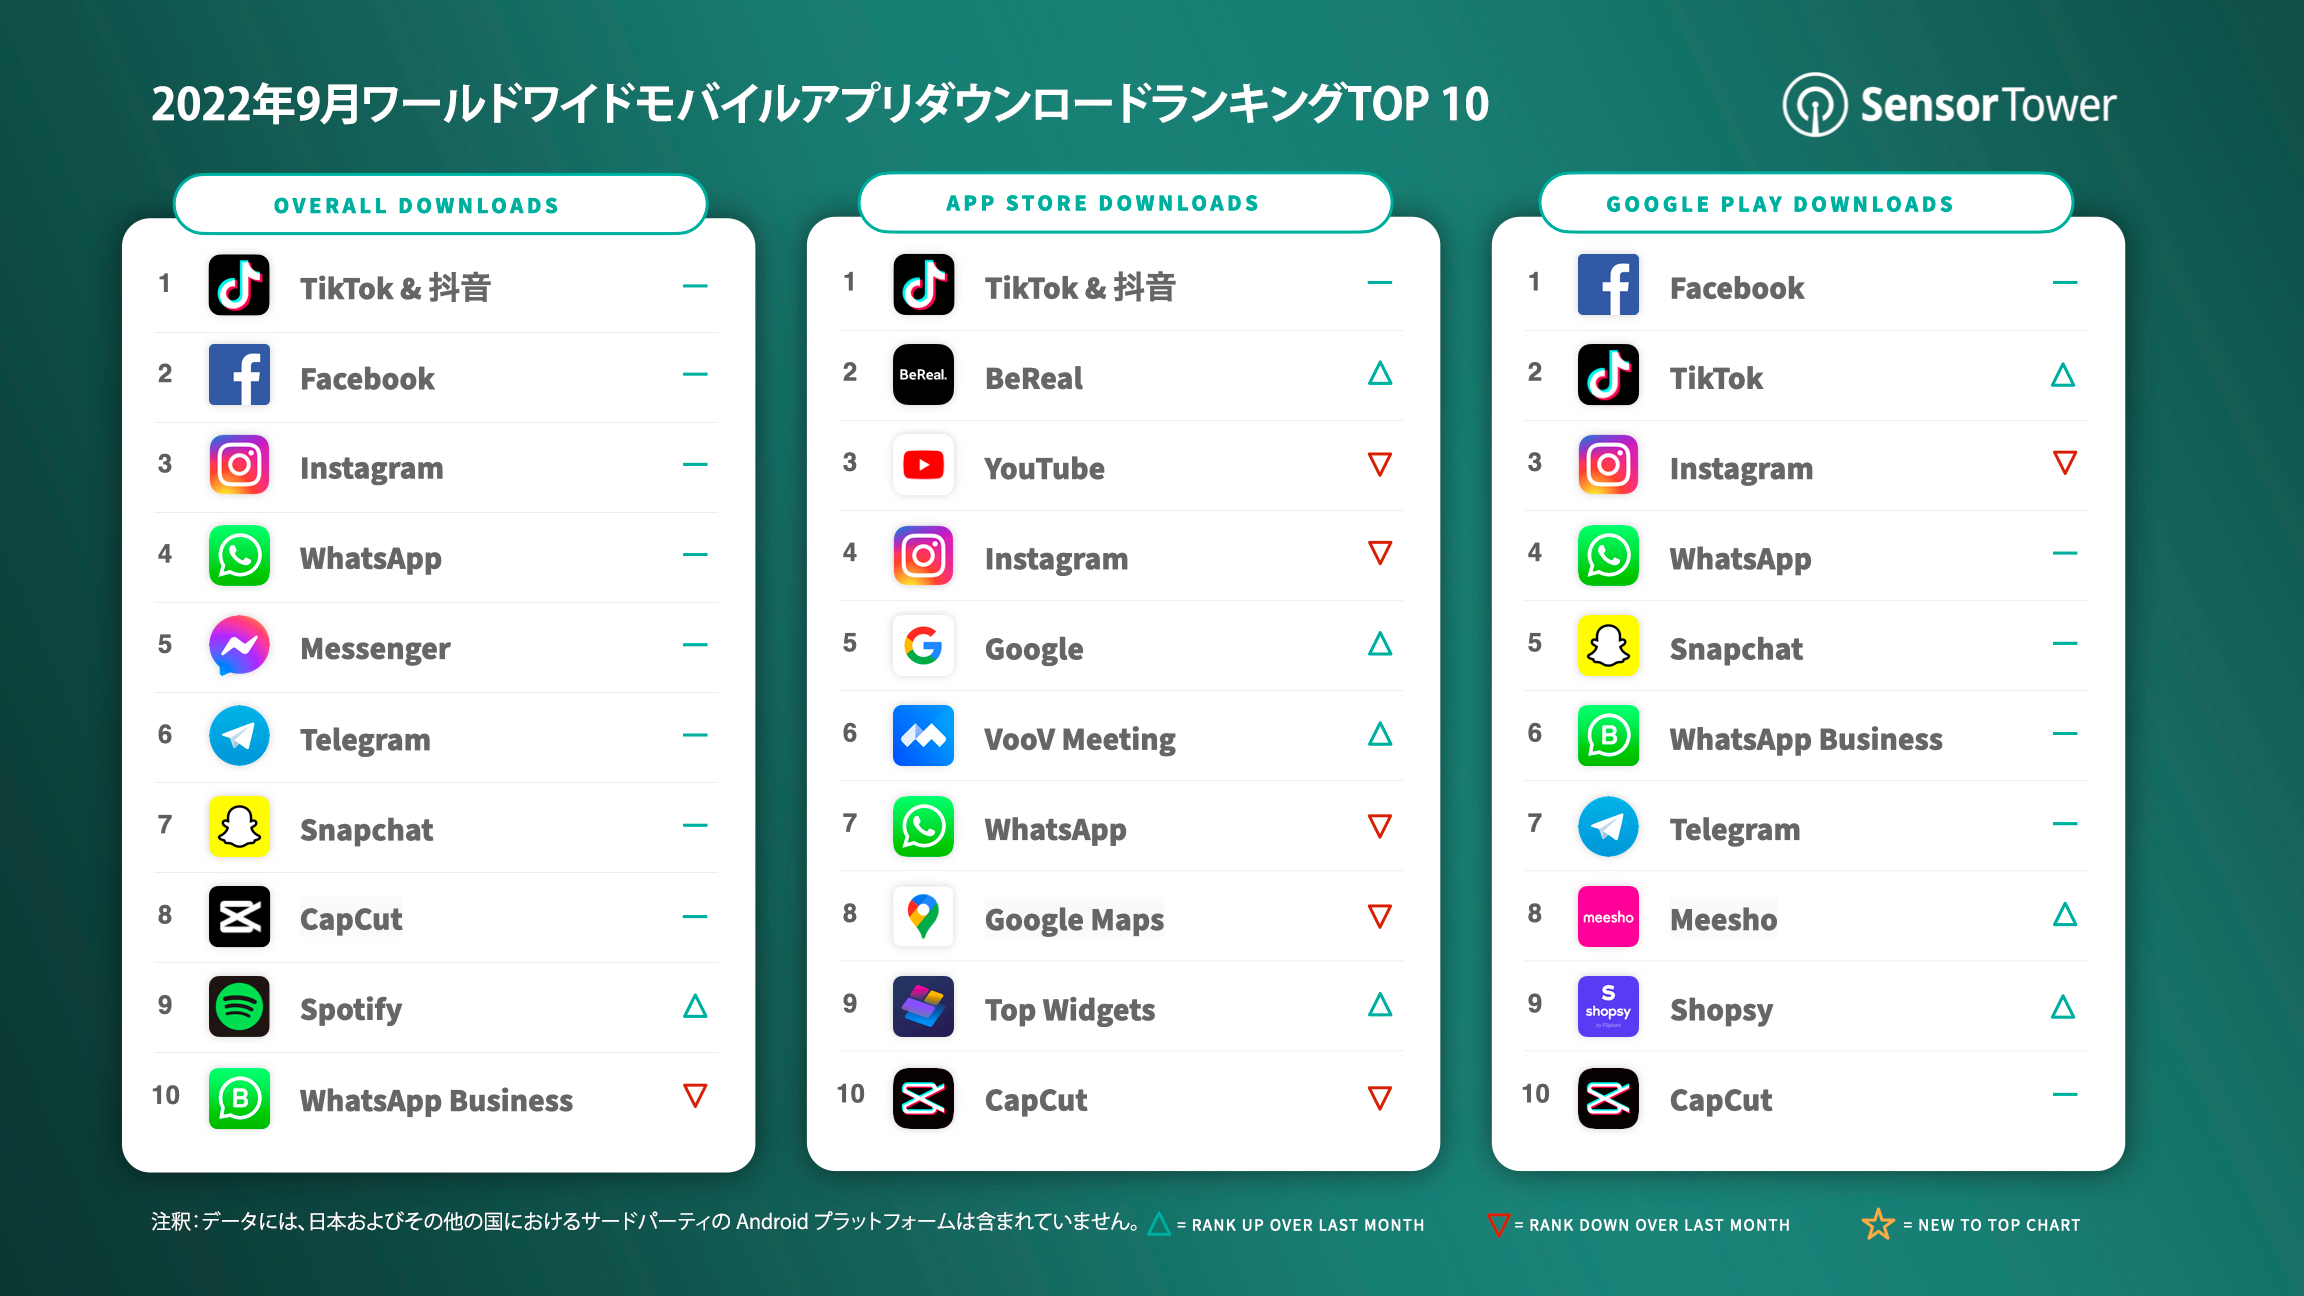 -JP-Top-Apps-Worldwide-for-Sep-2022-by-Downloads